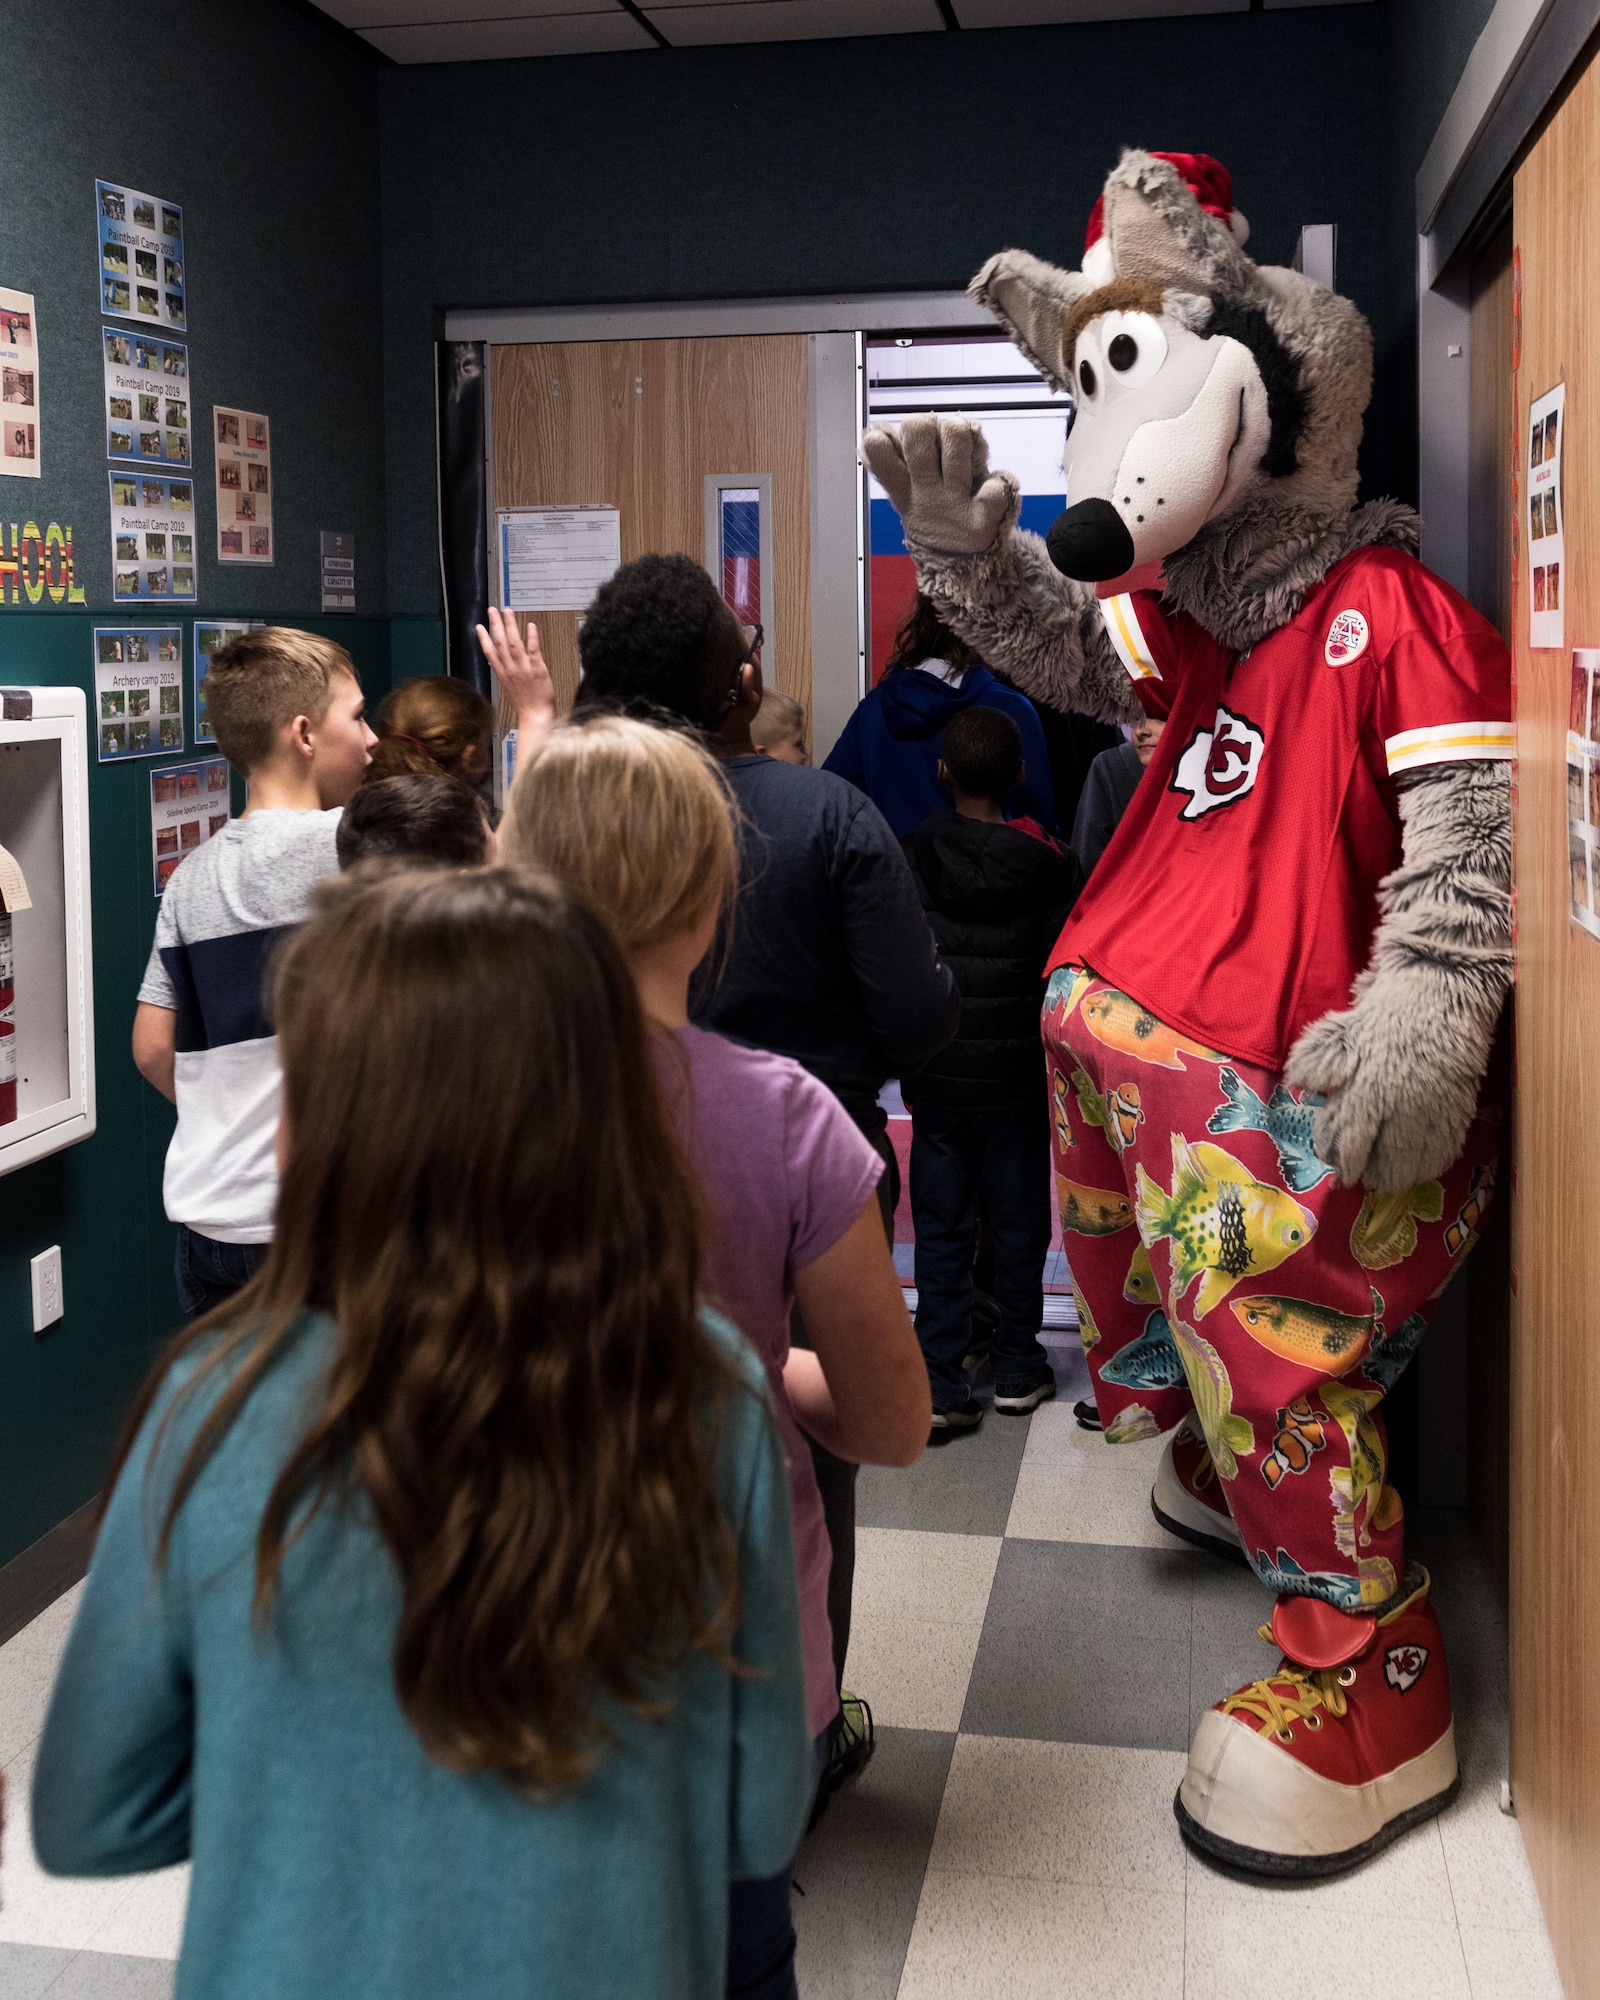 Dan Meers, the Kansas City Chiefs NFL team mascot KC Wolf, welcomes children at the Youth Center, Whiteman Air Force Base, Missouri, Dec. 18, 2019. Meers talked to the children about the importance of your attitude, behavior and character and answered questions about what life is like as a mascot as part of an outreach to positively influence their overall well-being and promote resiliency. (U.S. Air Force photo by Airman 1st Class Christina Carter)